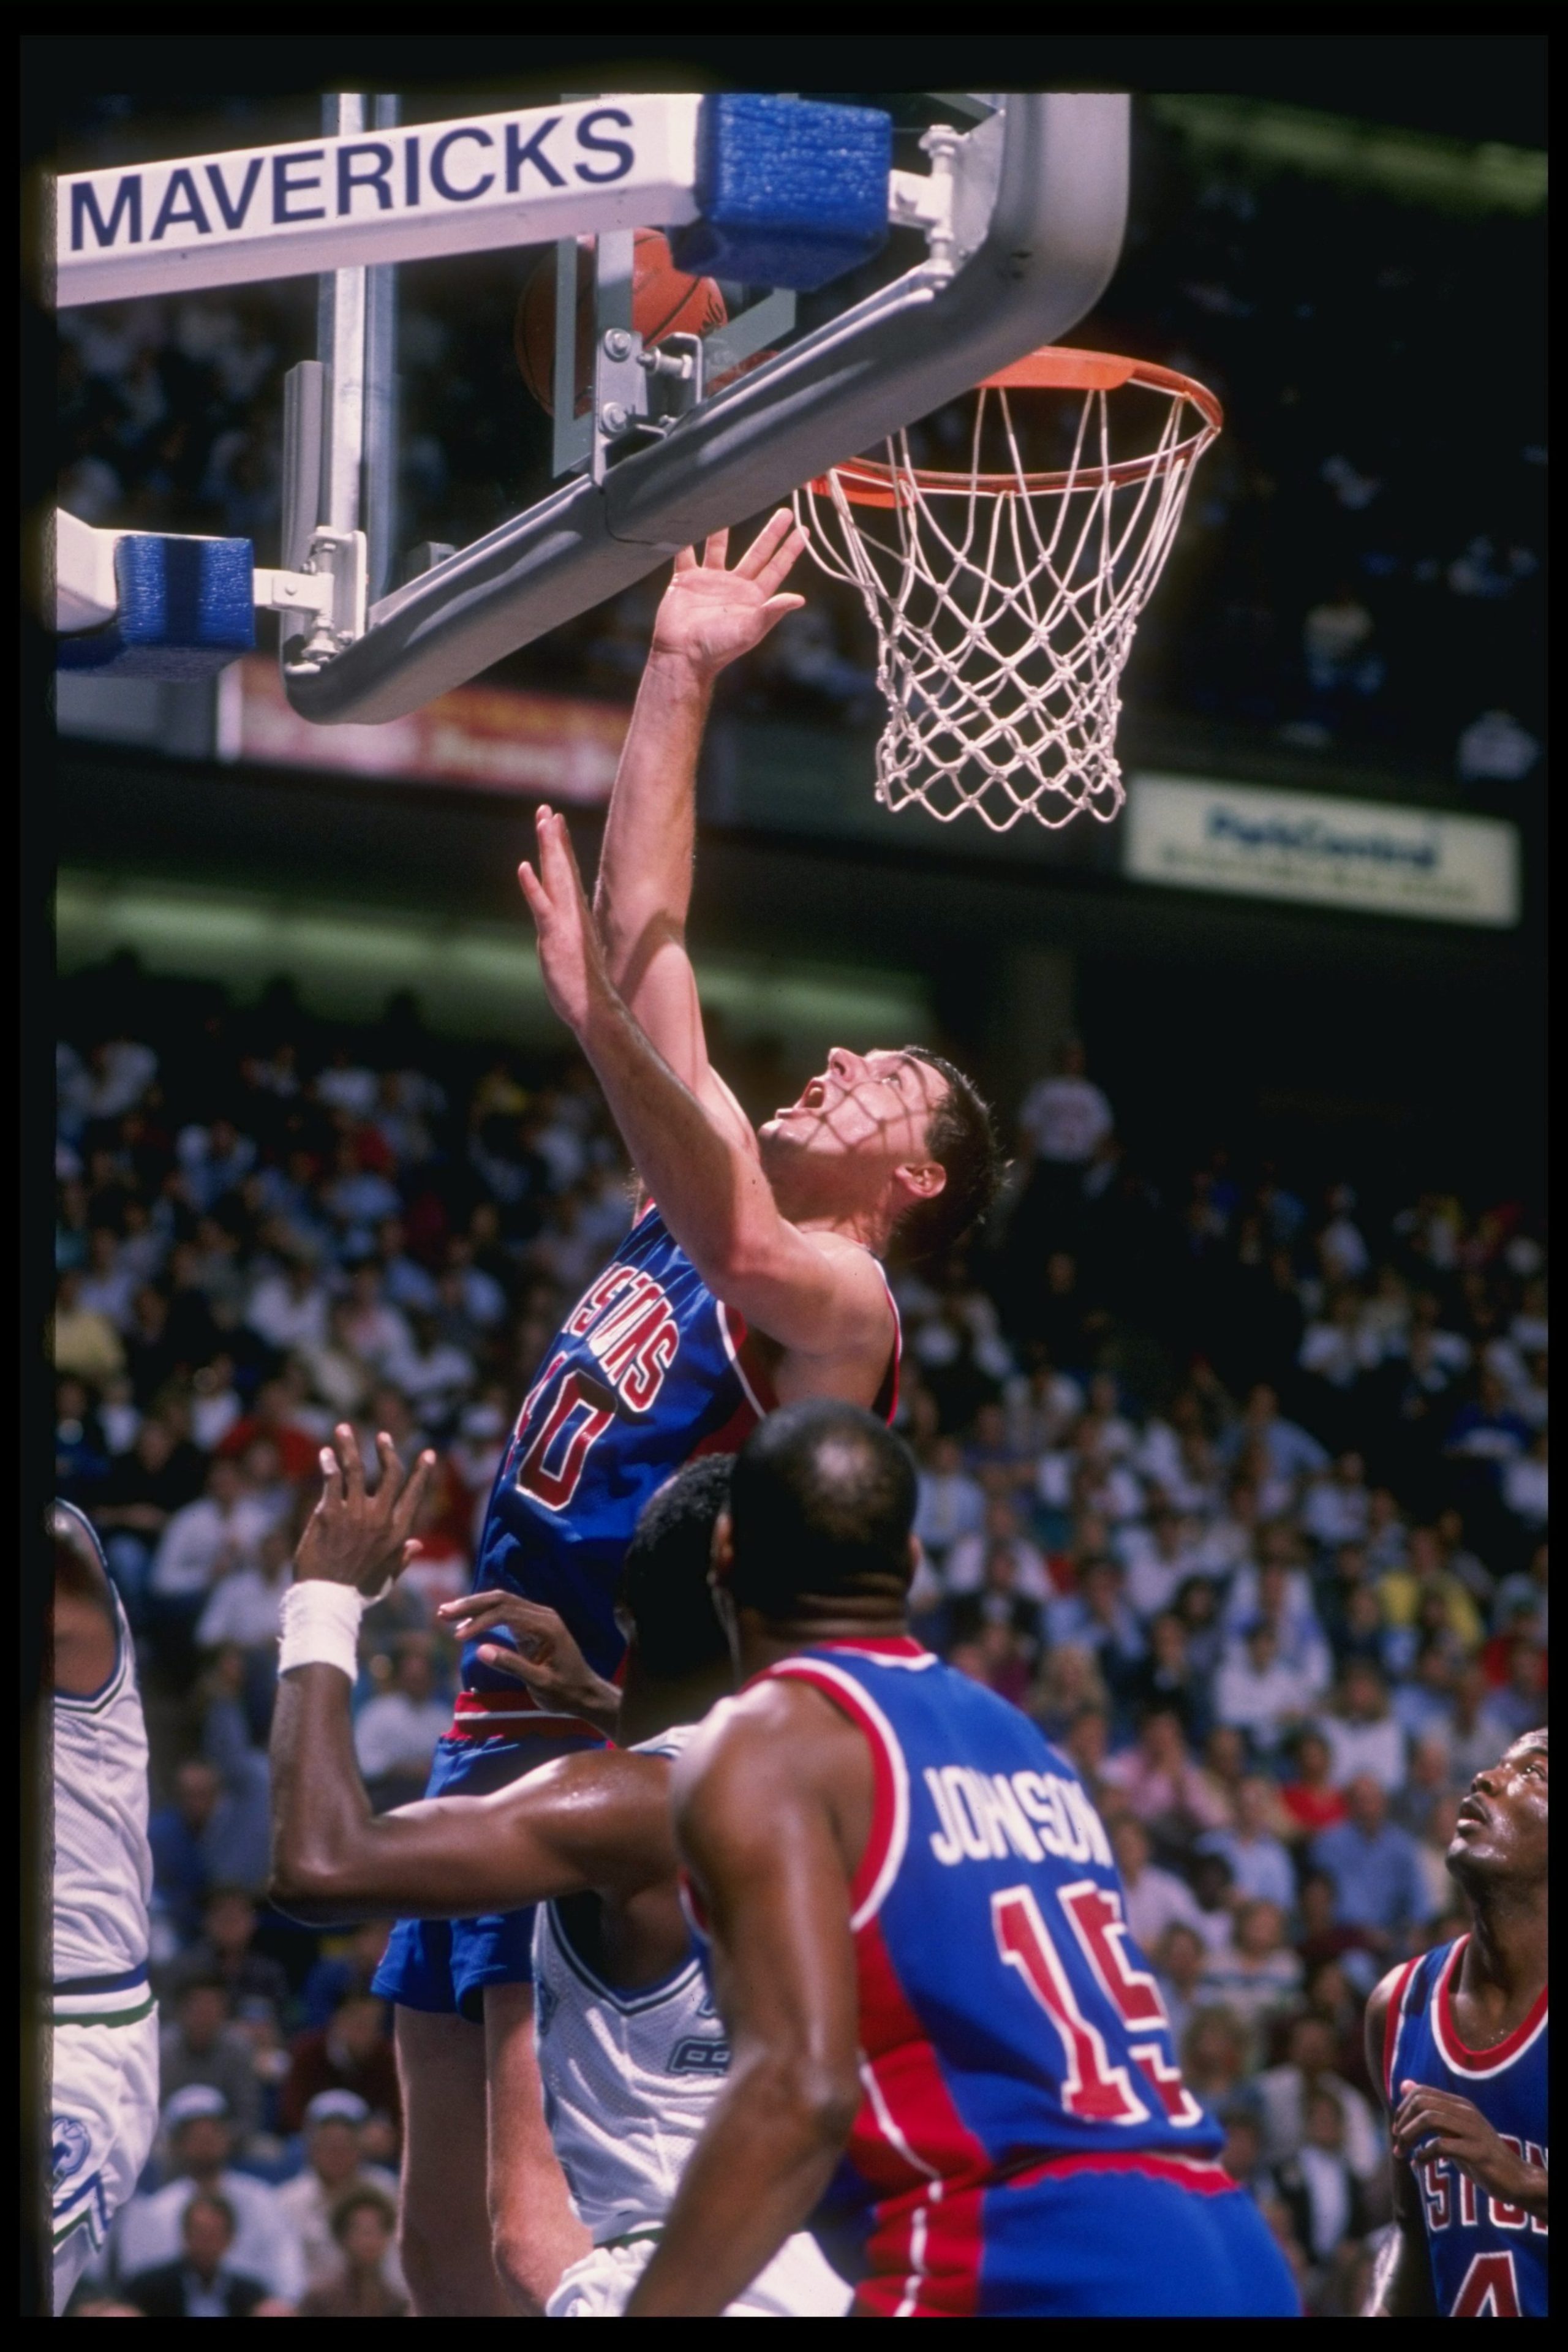 1990: Center Bill Laimbeer of the Detroit Pistons goes up for two during a game against the Dallas Mavericks. Joe Patronite /Allsport